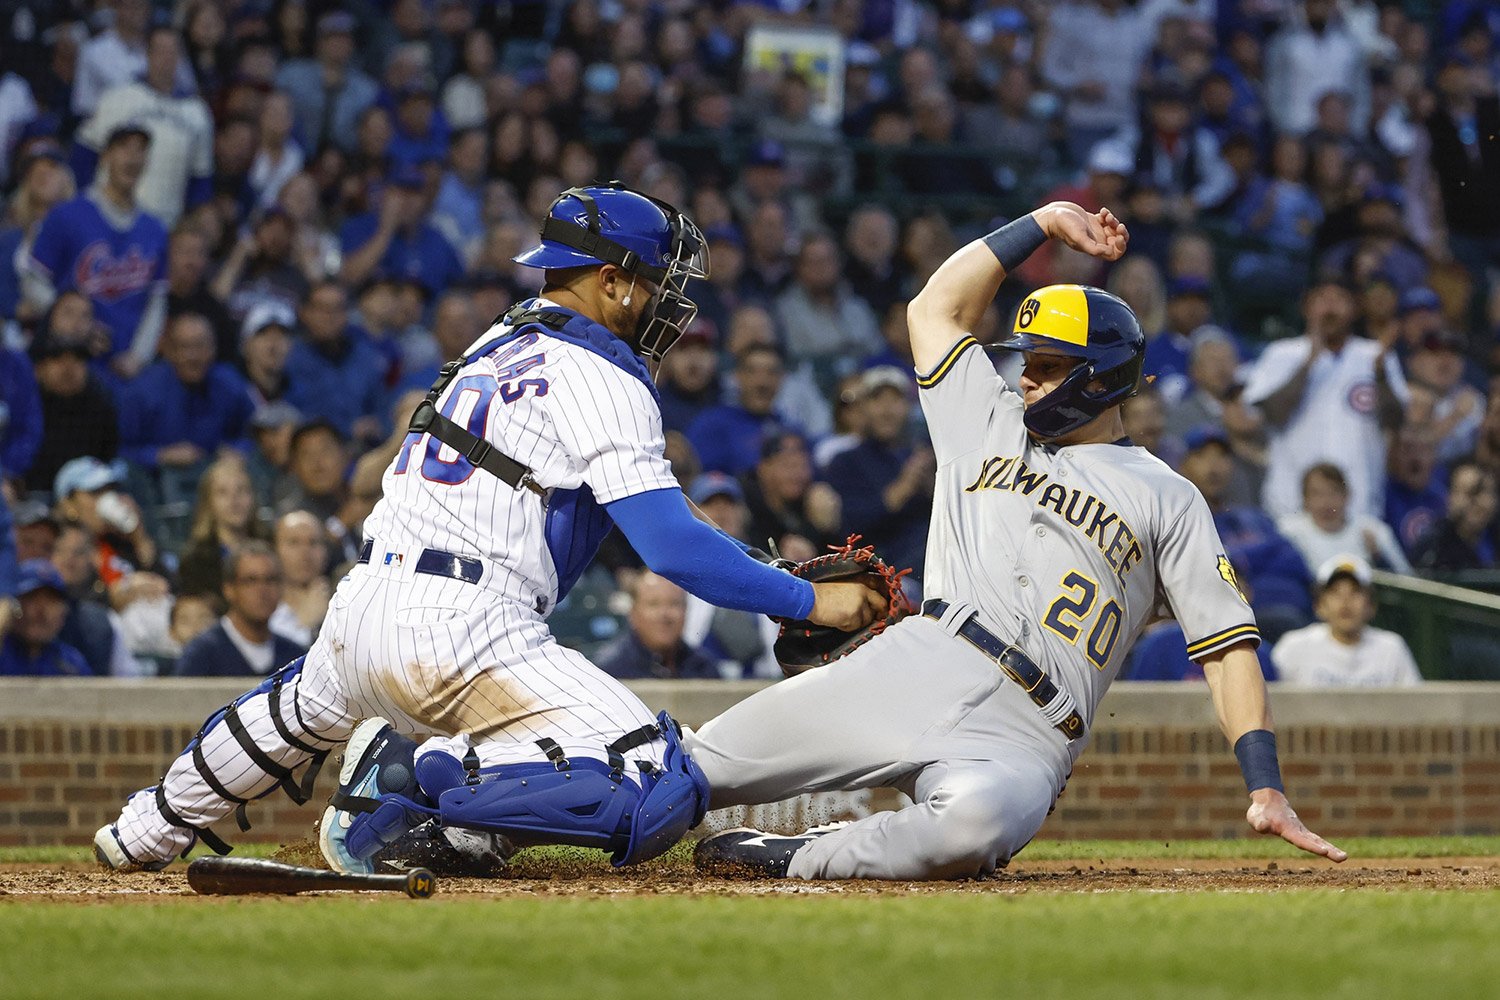 MLB on X: For the 5th time in 6 seasons, the @Brewers are headed